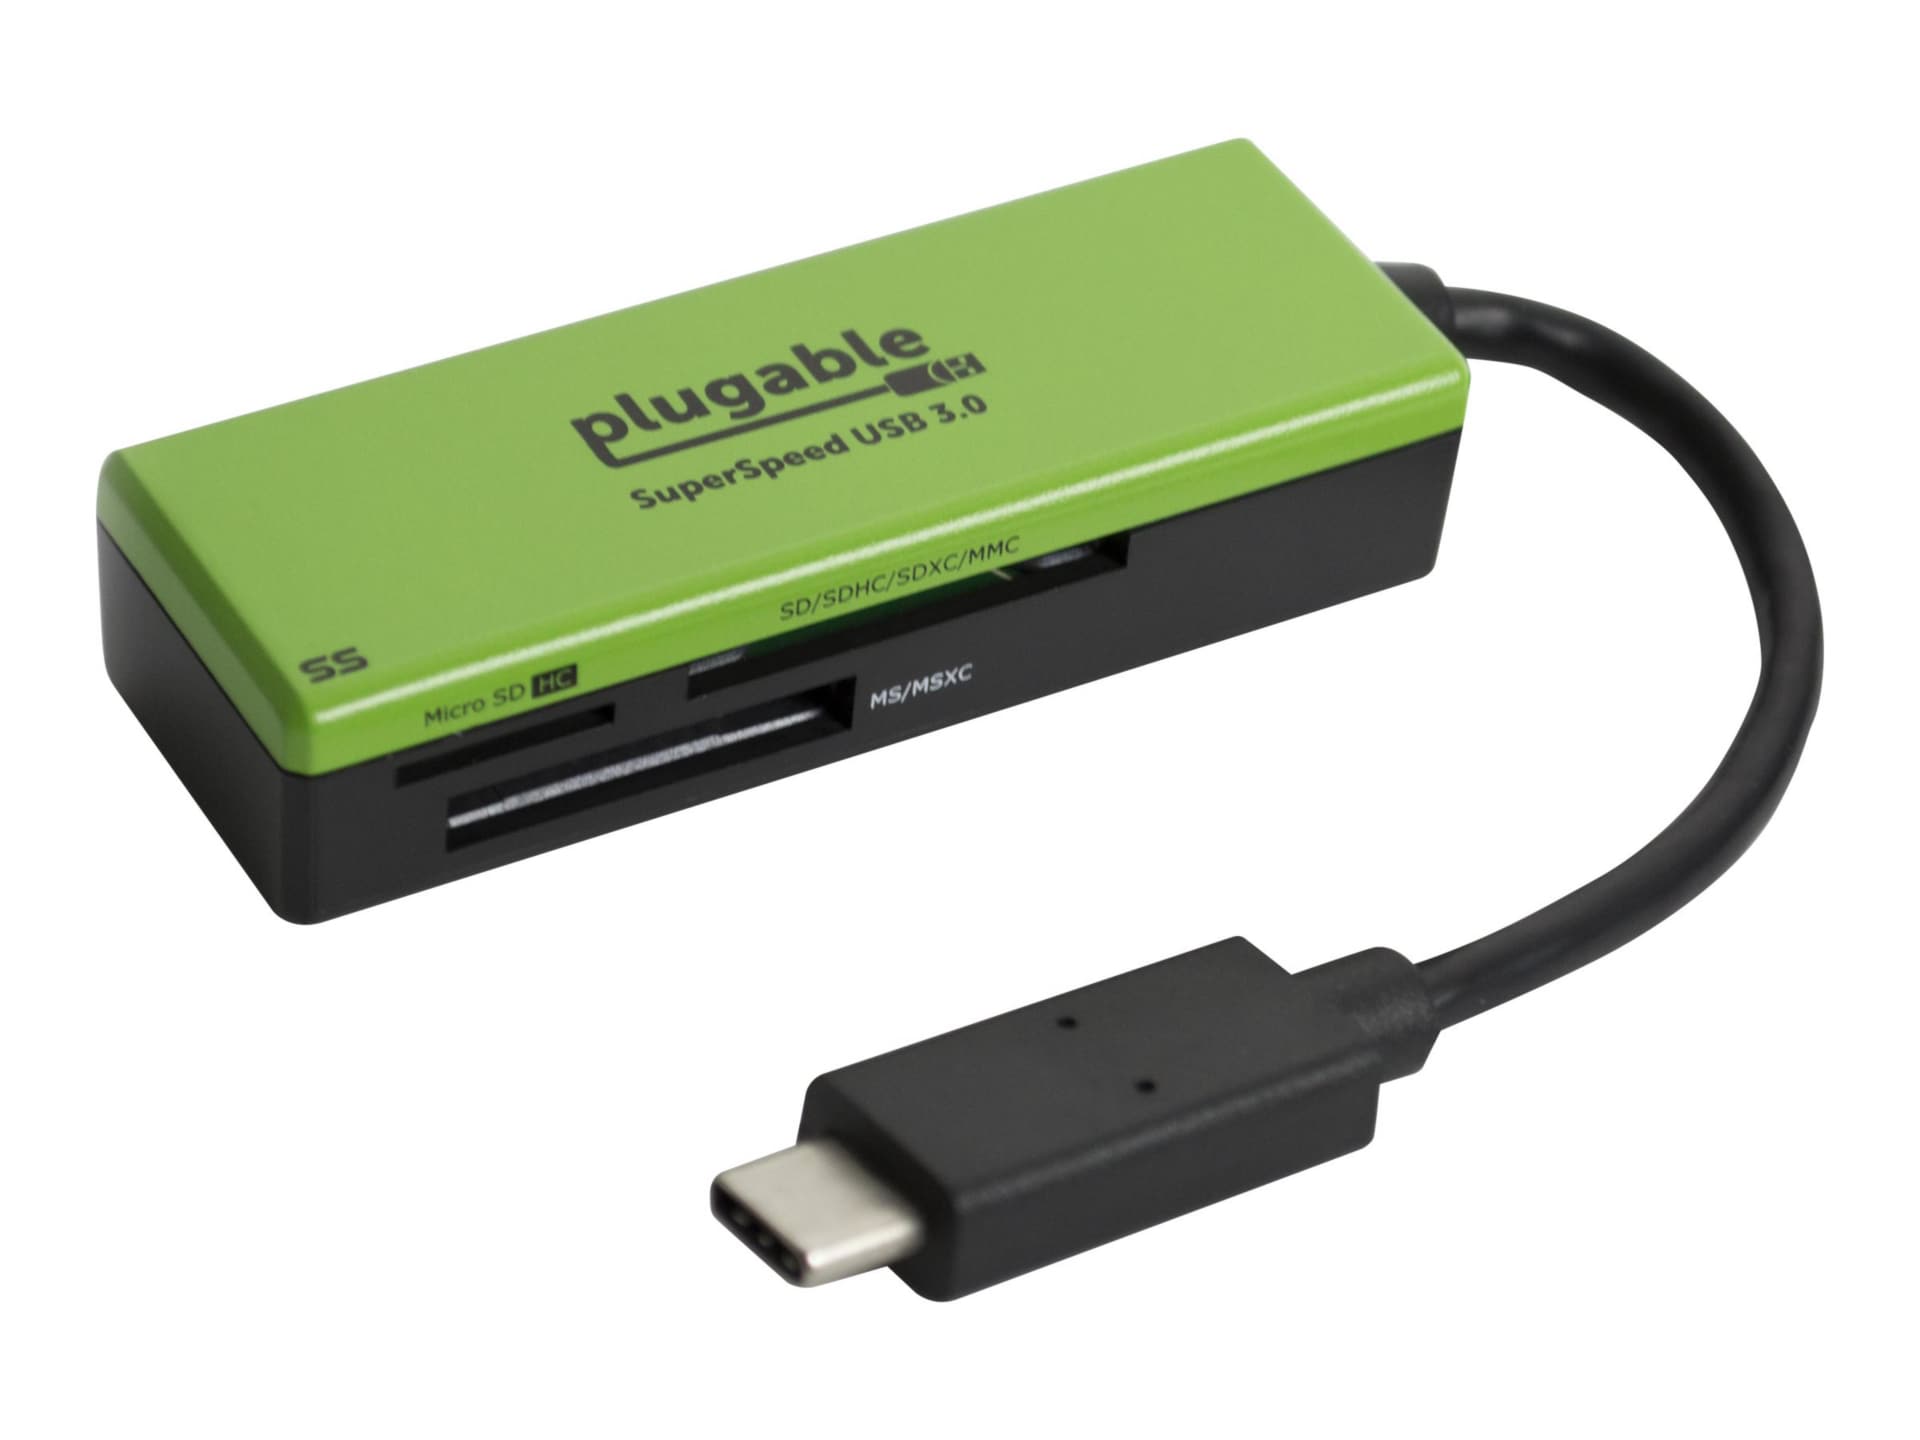 Plugable USB C SD Card Reader - Driverless USB C Card Reader for SD, Micro SD, MMC, or MS Cards